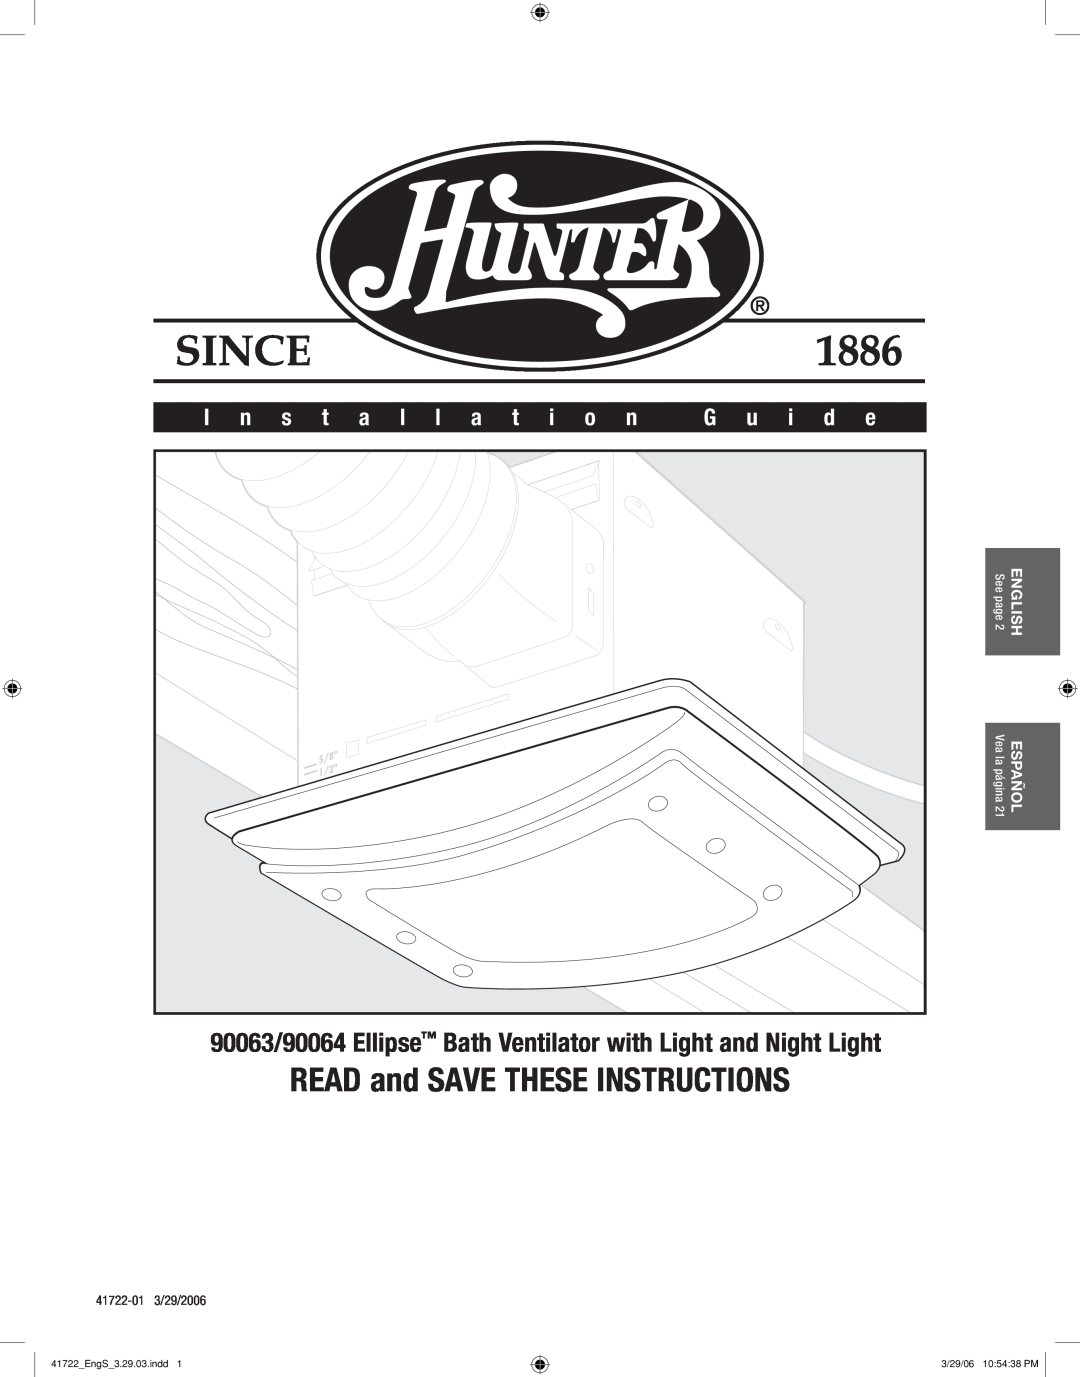 Hunter Fan manual READ and SAVE THESE INSTRUCTIONS, 90063/90064 Ellipse Bath Ventilator with Light and Night Light 